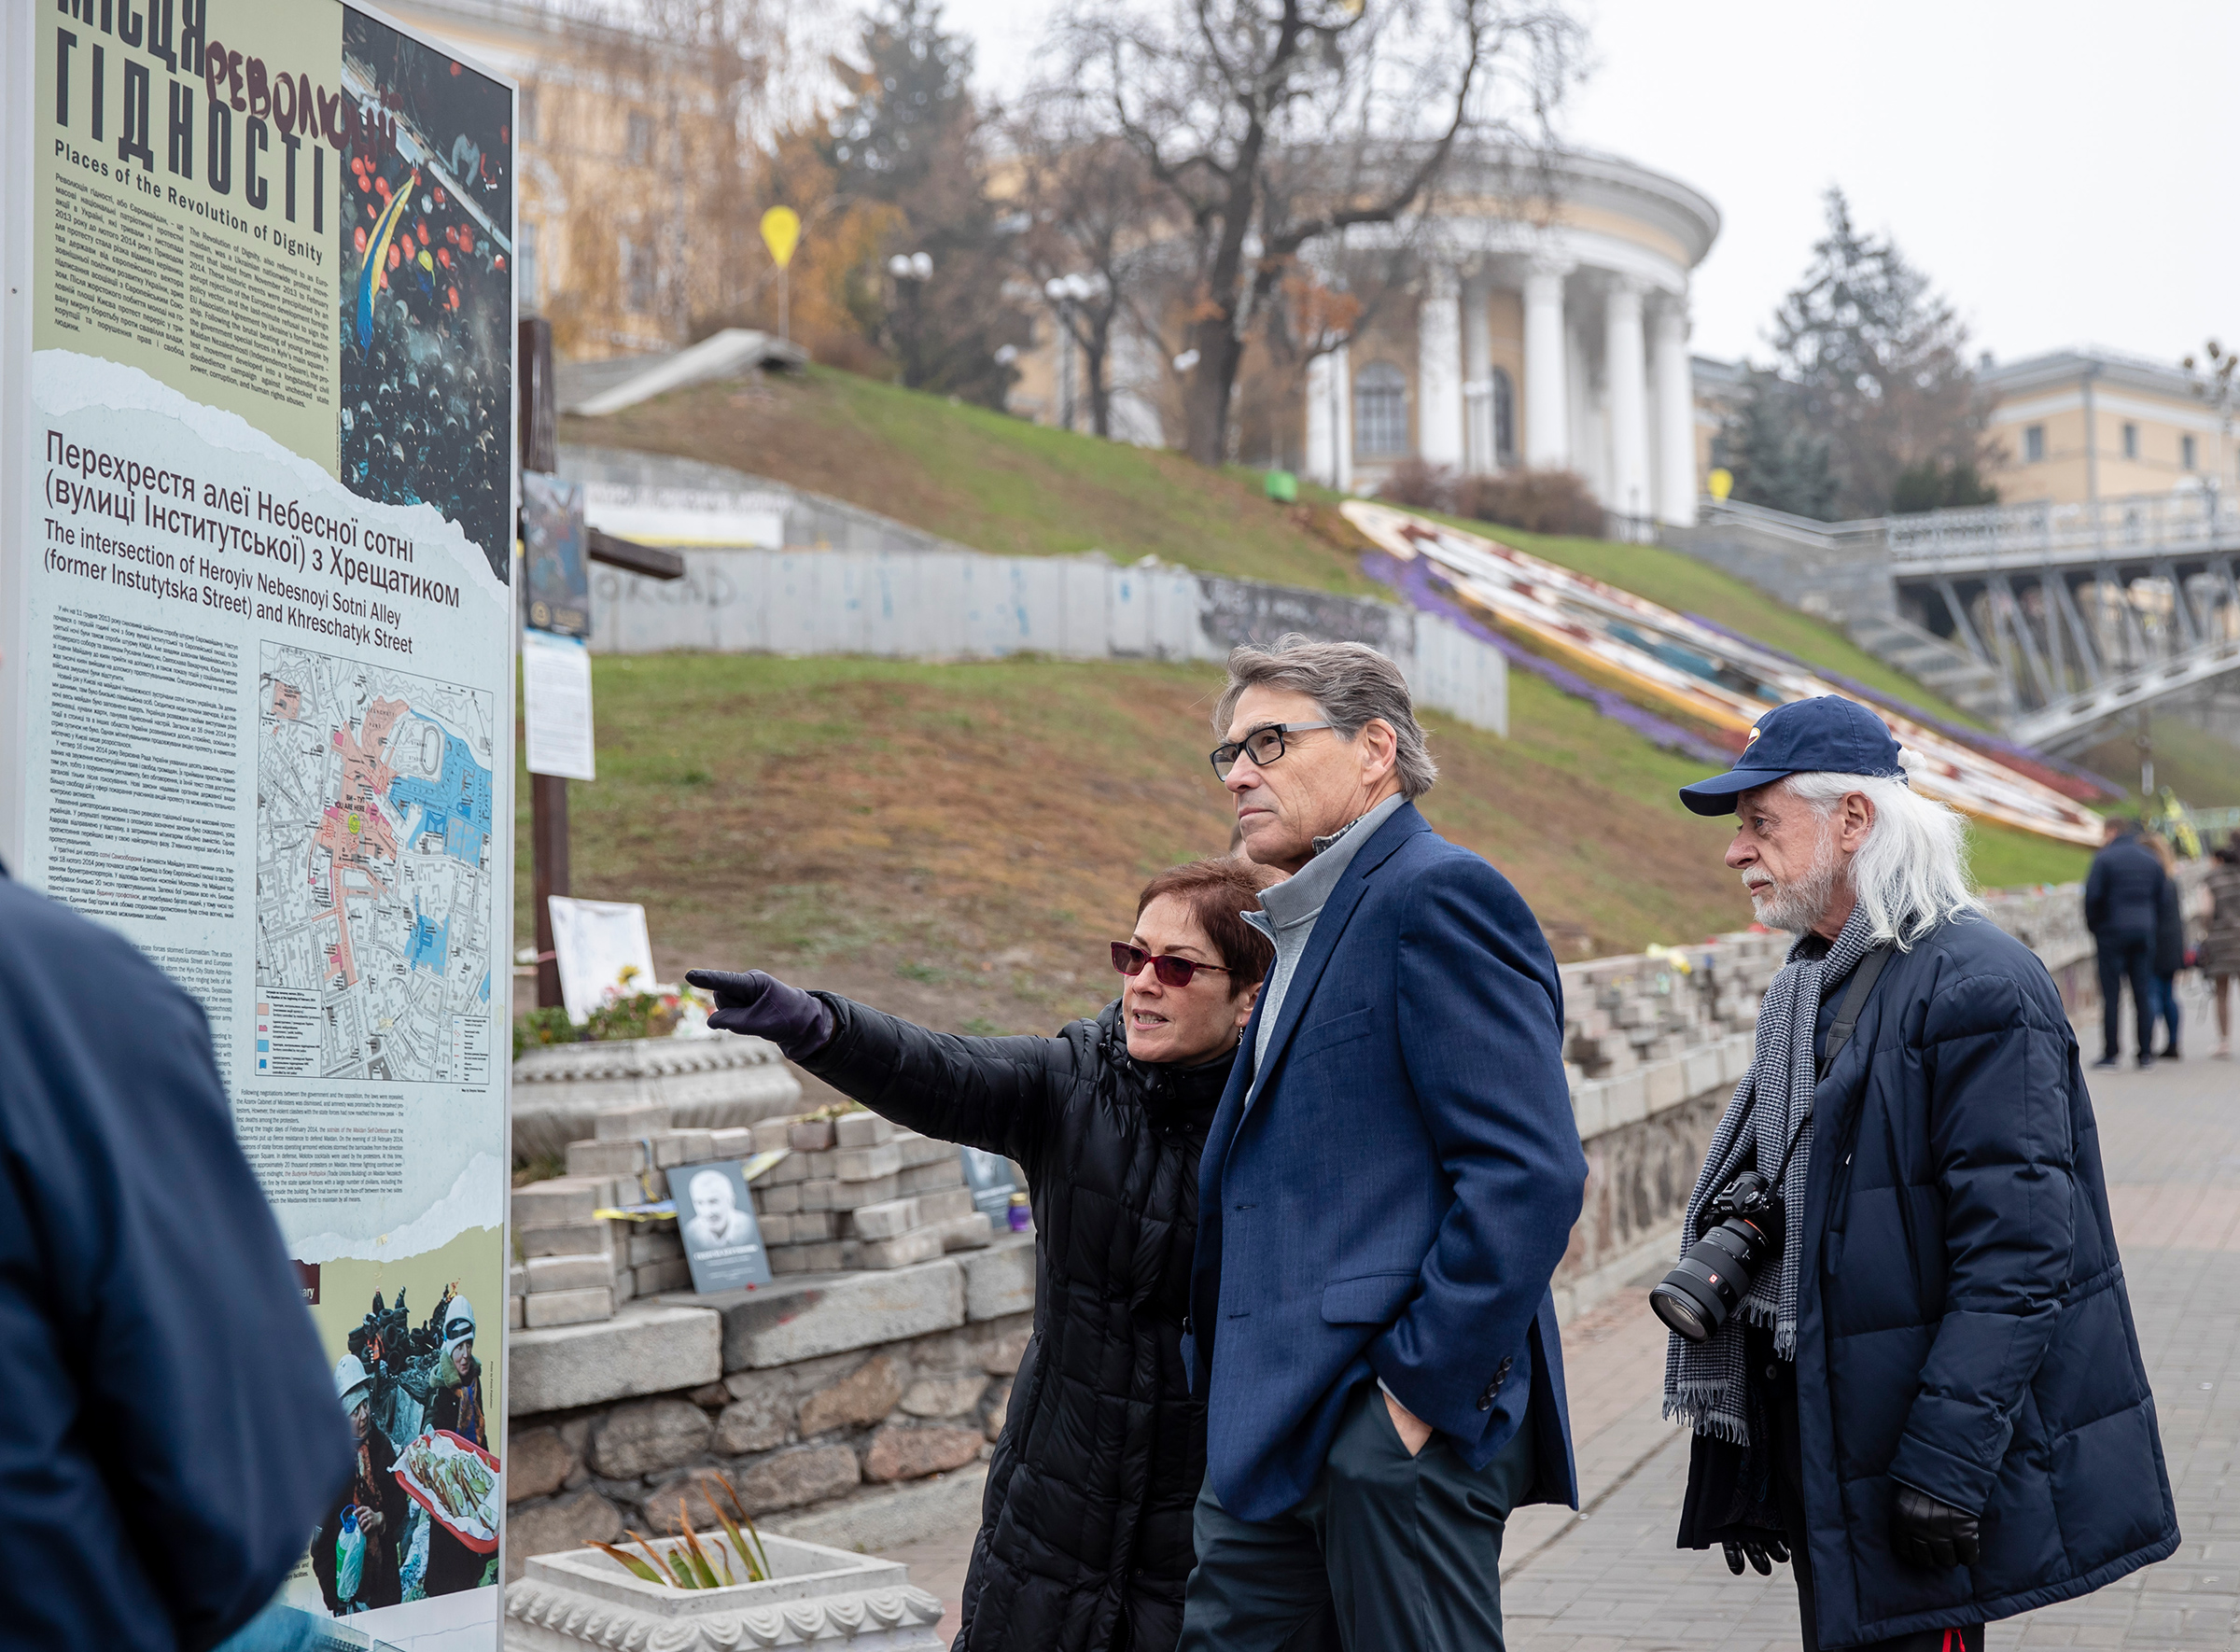 Perry and Michael Bleyzer, pictured here with Ambassador Yovanovitch during their trip to Kyiv in Nov. 2018. (Courtesy U.S. Embassy Kyiv)